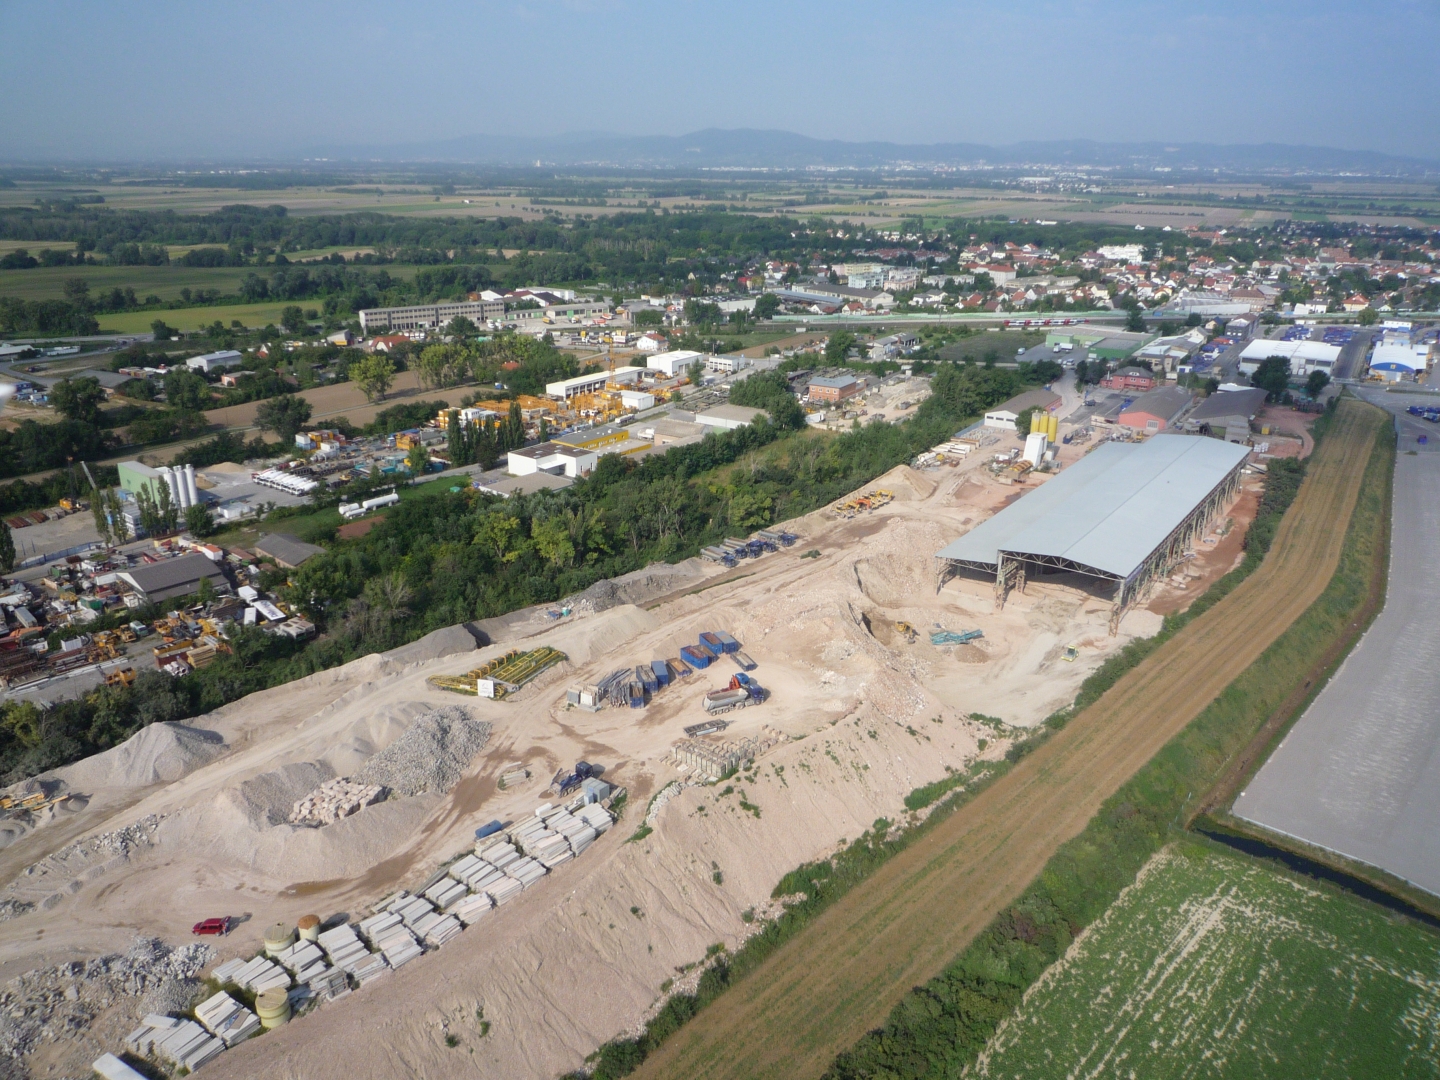 Photo: Recycling plant Himberg: Aerial shot of the vast construction facilities with halls and storage areas for residual construction waste sorted by grades.